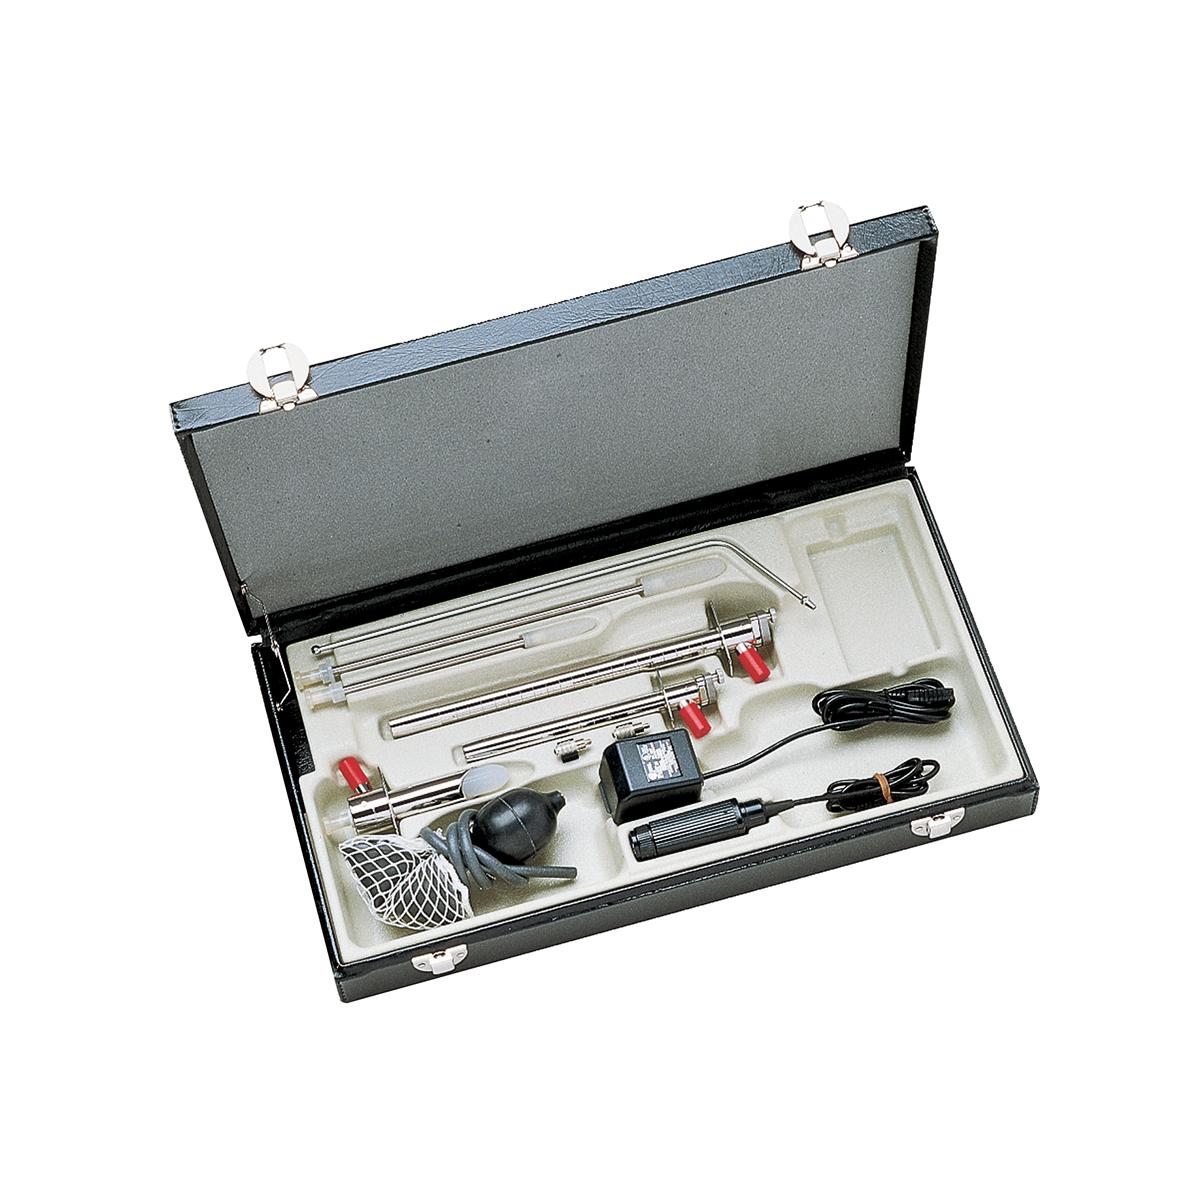 A Welch Allyn Fibre-Optic Sigmoidoscope set in its carry case, featuring separate chambers for scopes, insufflation bulb and power supplies.